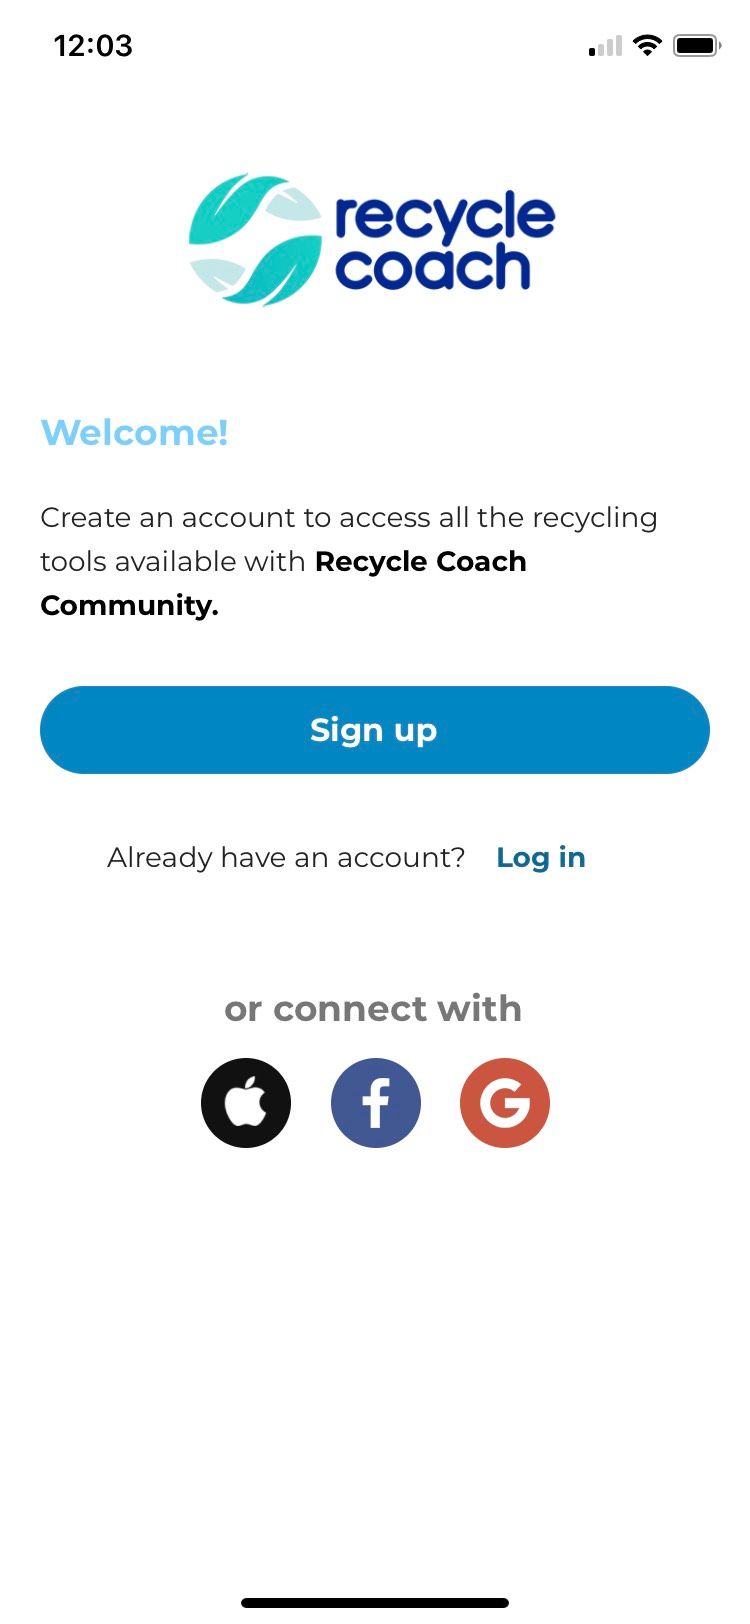 Recycle Coach startup page.